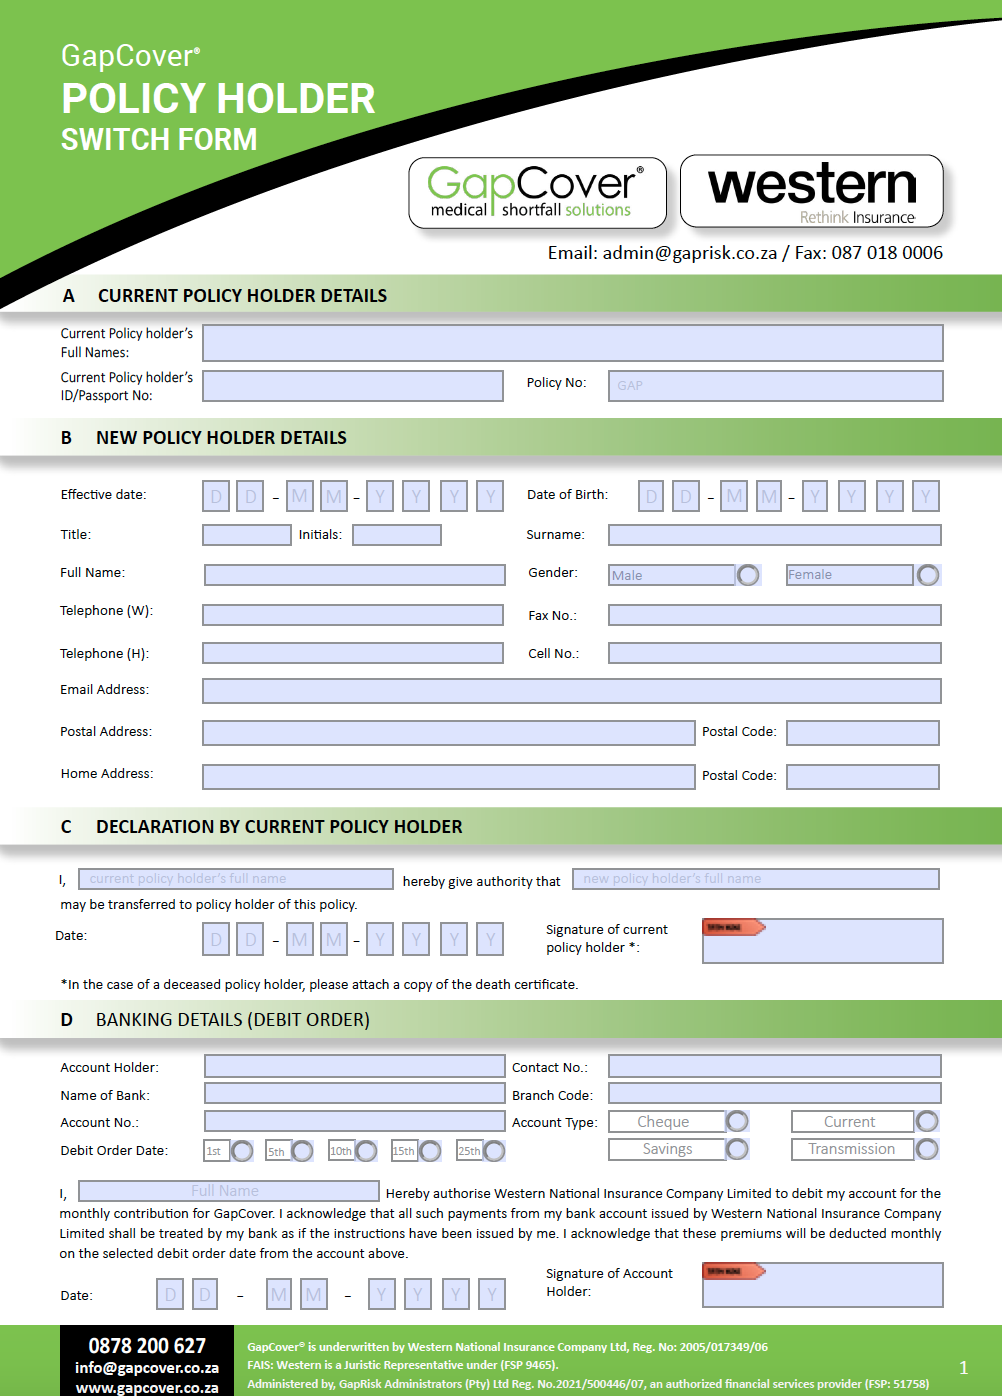 GapCover & Combined Policy Switch Form